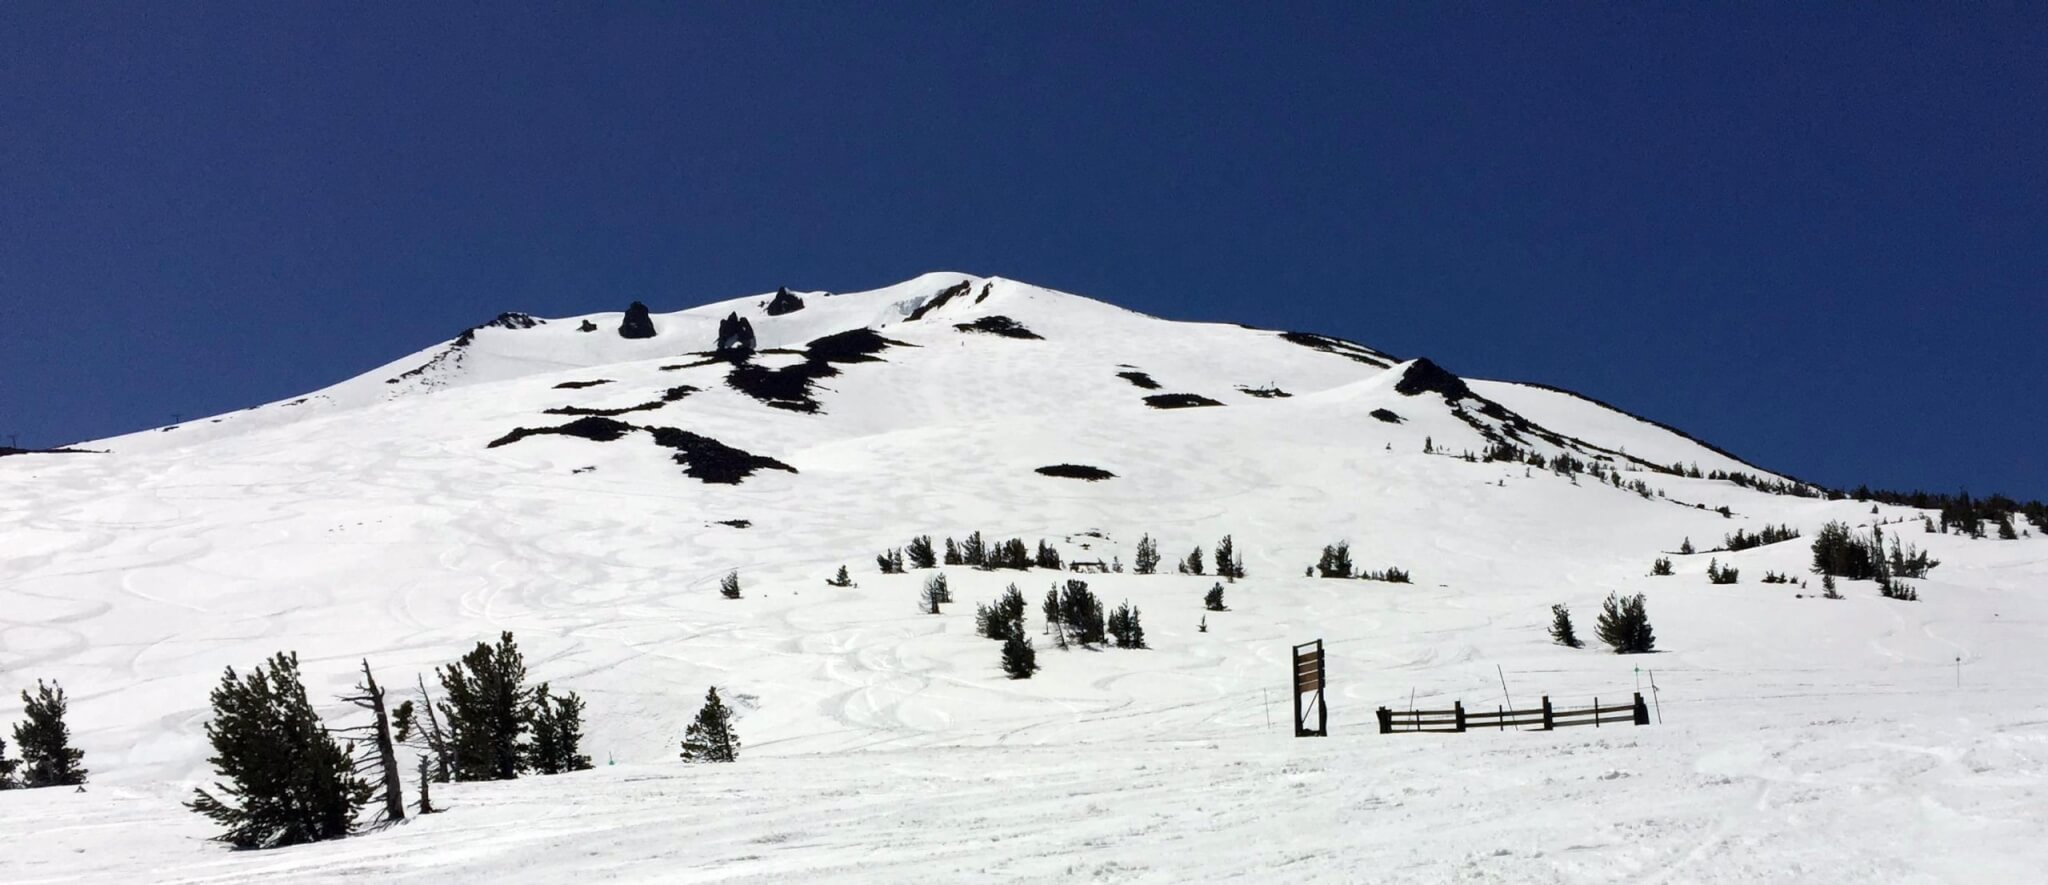 transitional snow at Mt Bachelor in May